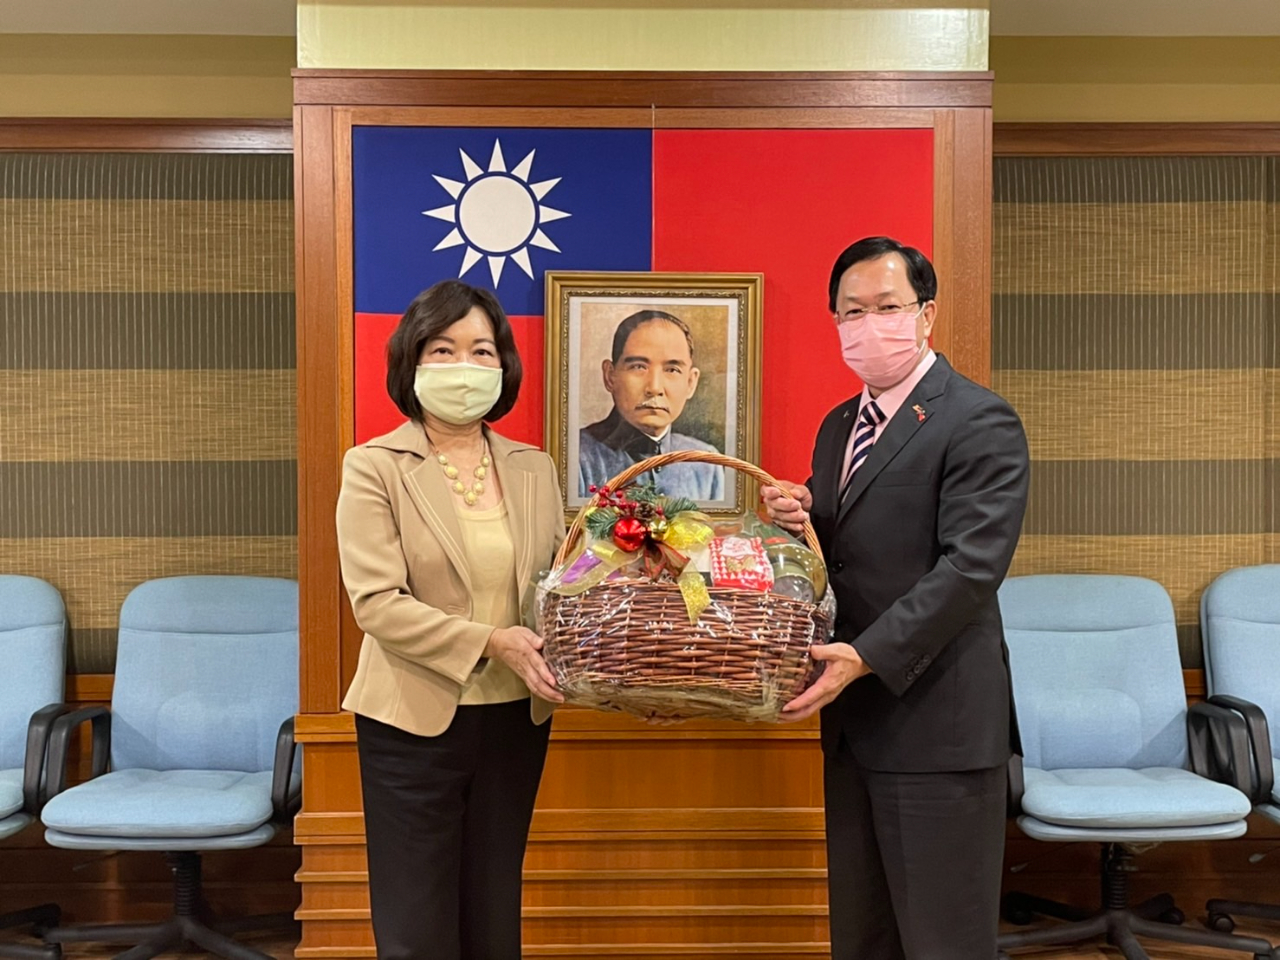 Representative Anne Hung presents a Christmas gift